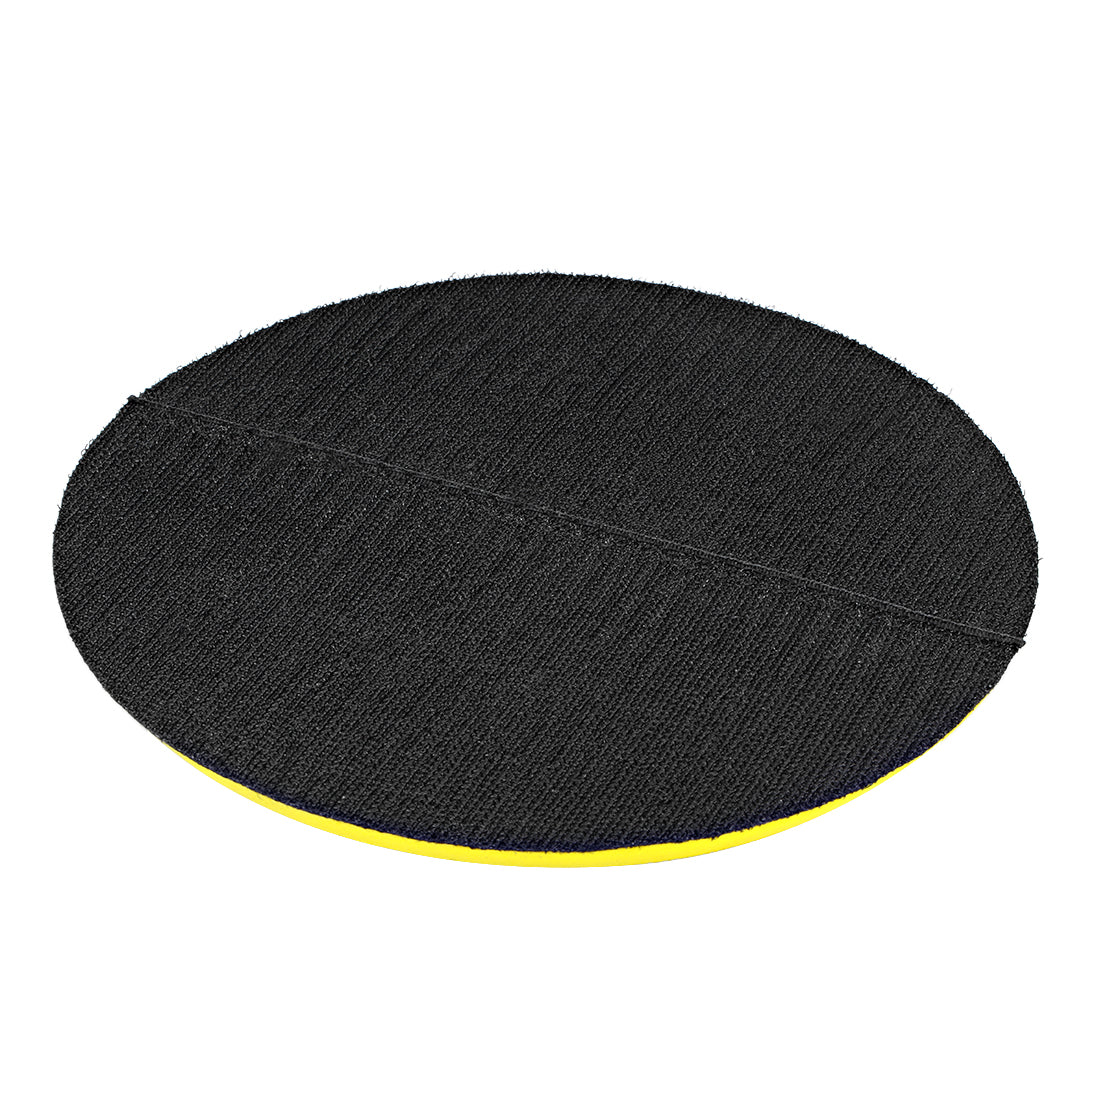 uxcell Uxcell 7" Hook and Loop Backing Pad Orbital Sander Polishing Pad with M14 Drill Adapter